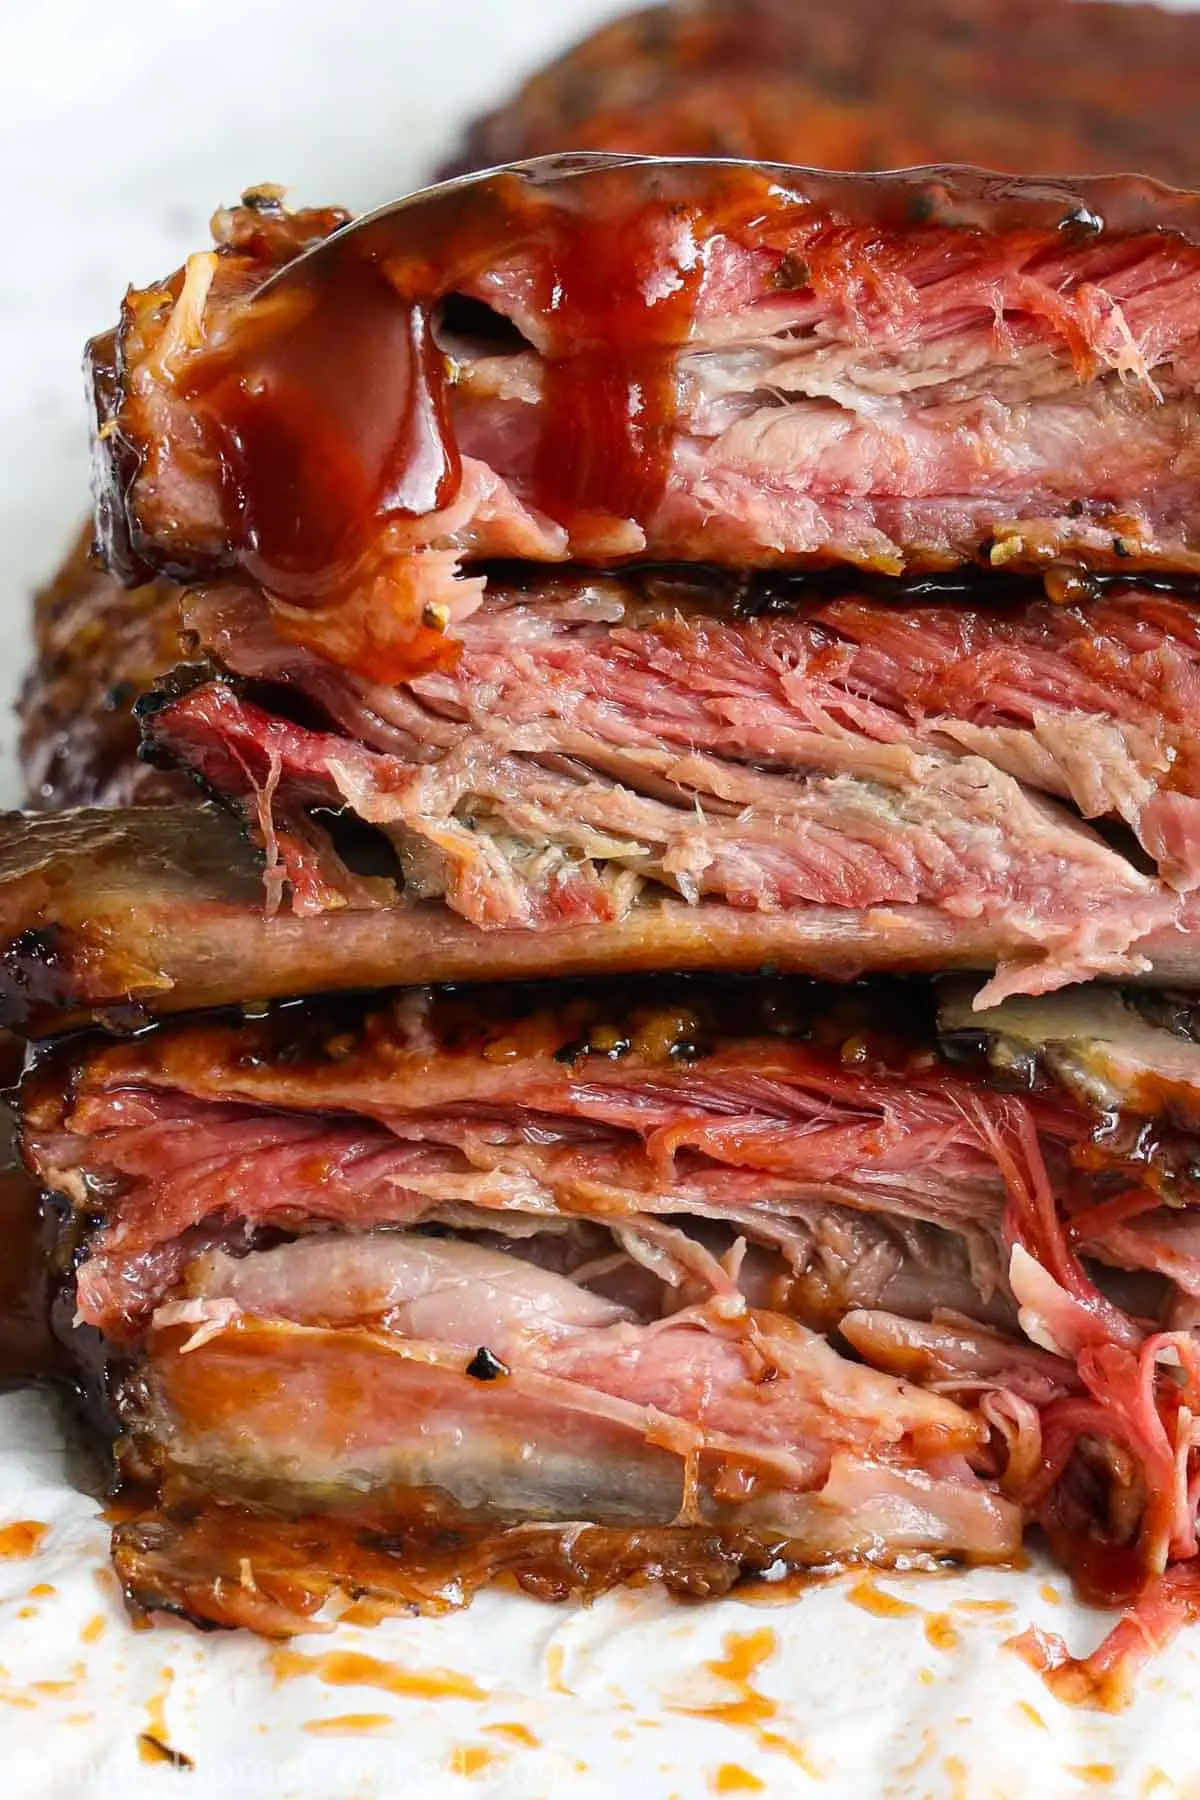 how to cook already smoked ribs - How do you cook already prepared ribs